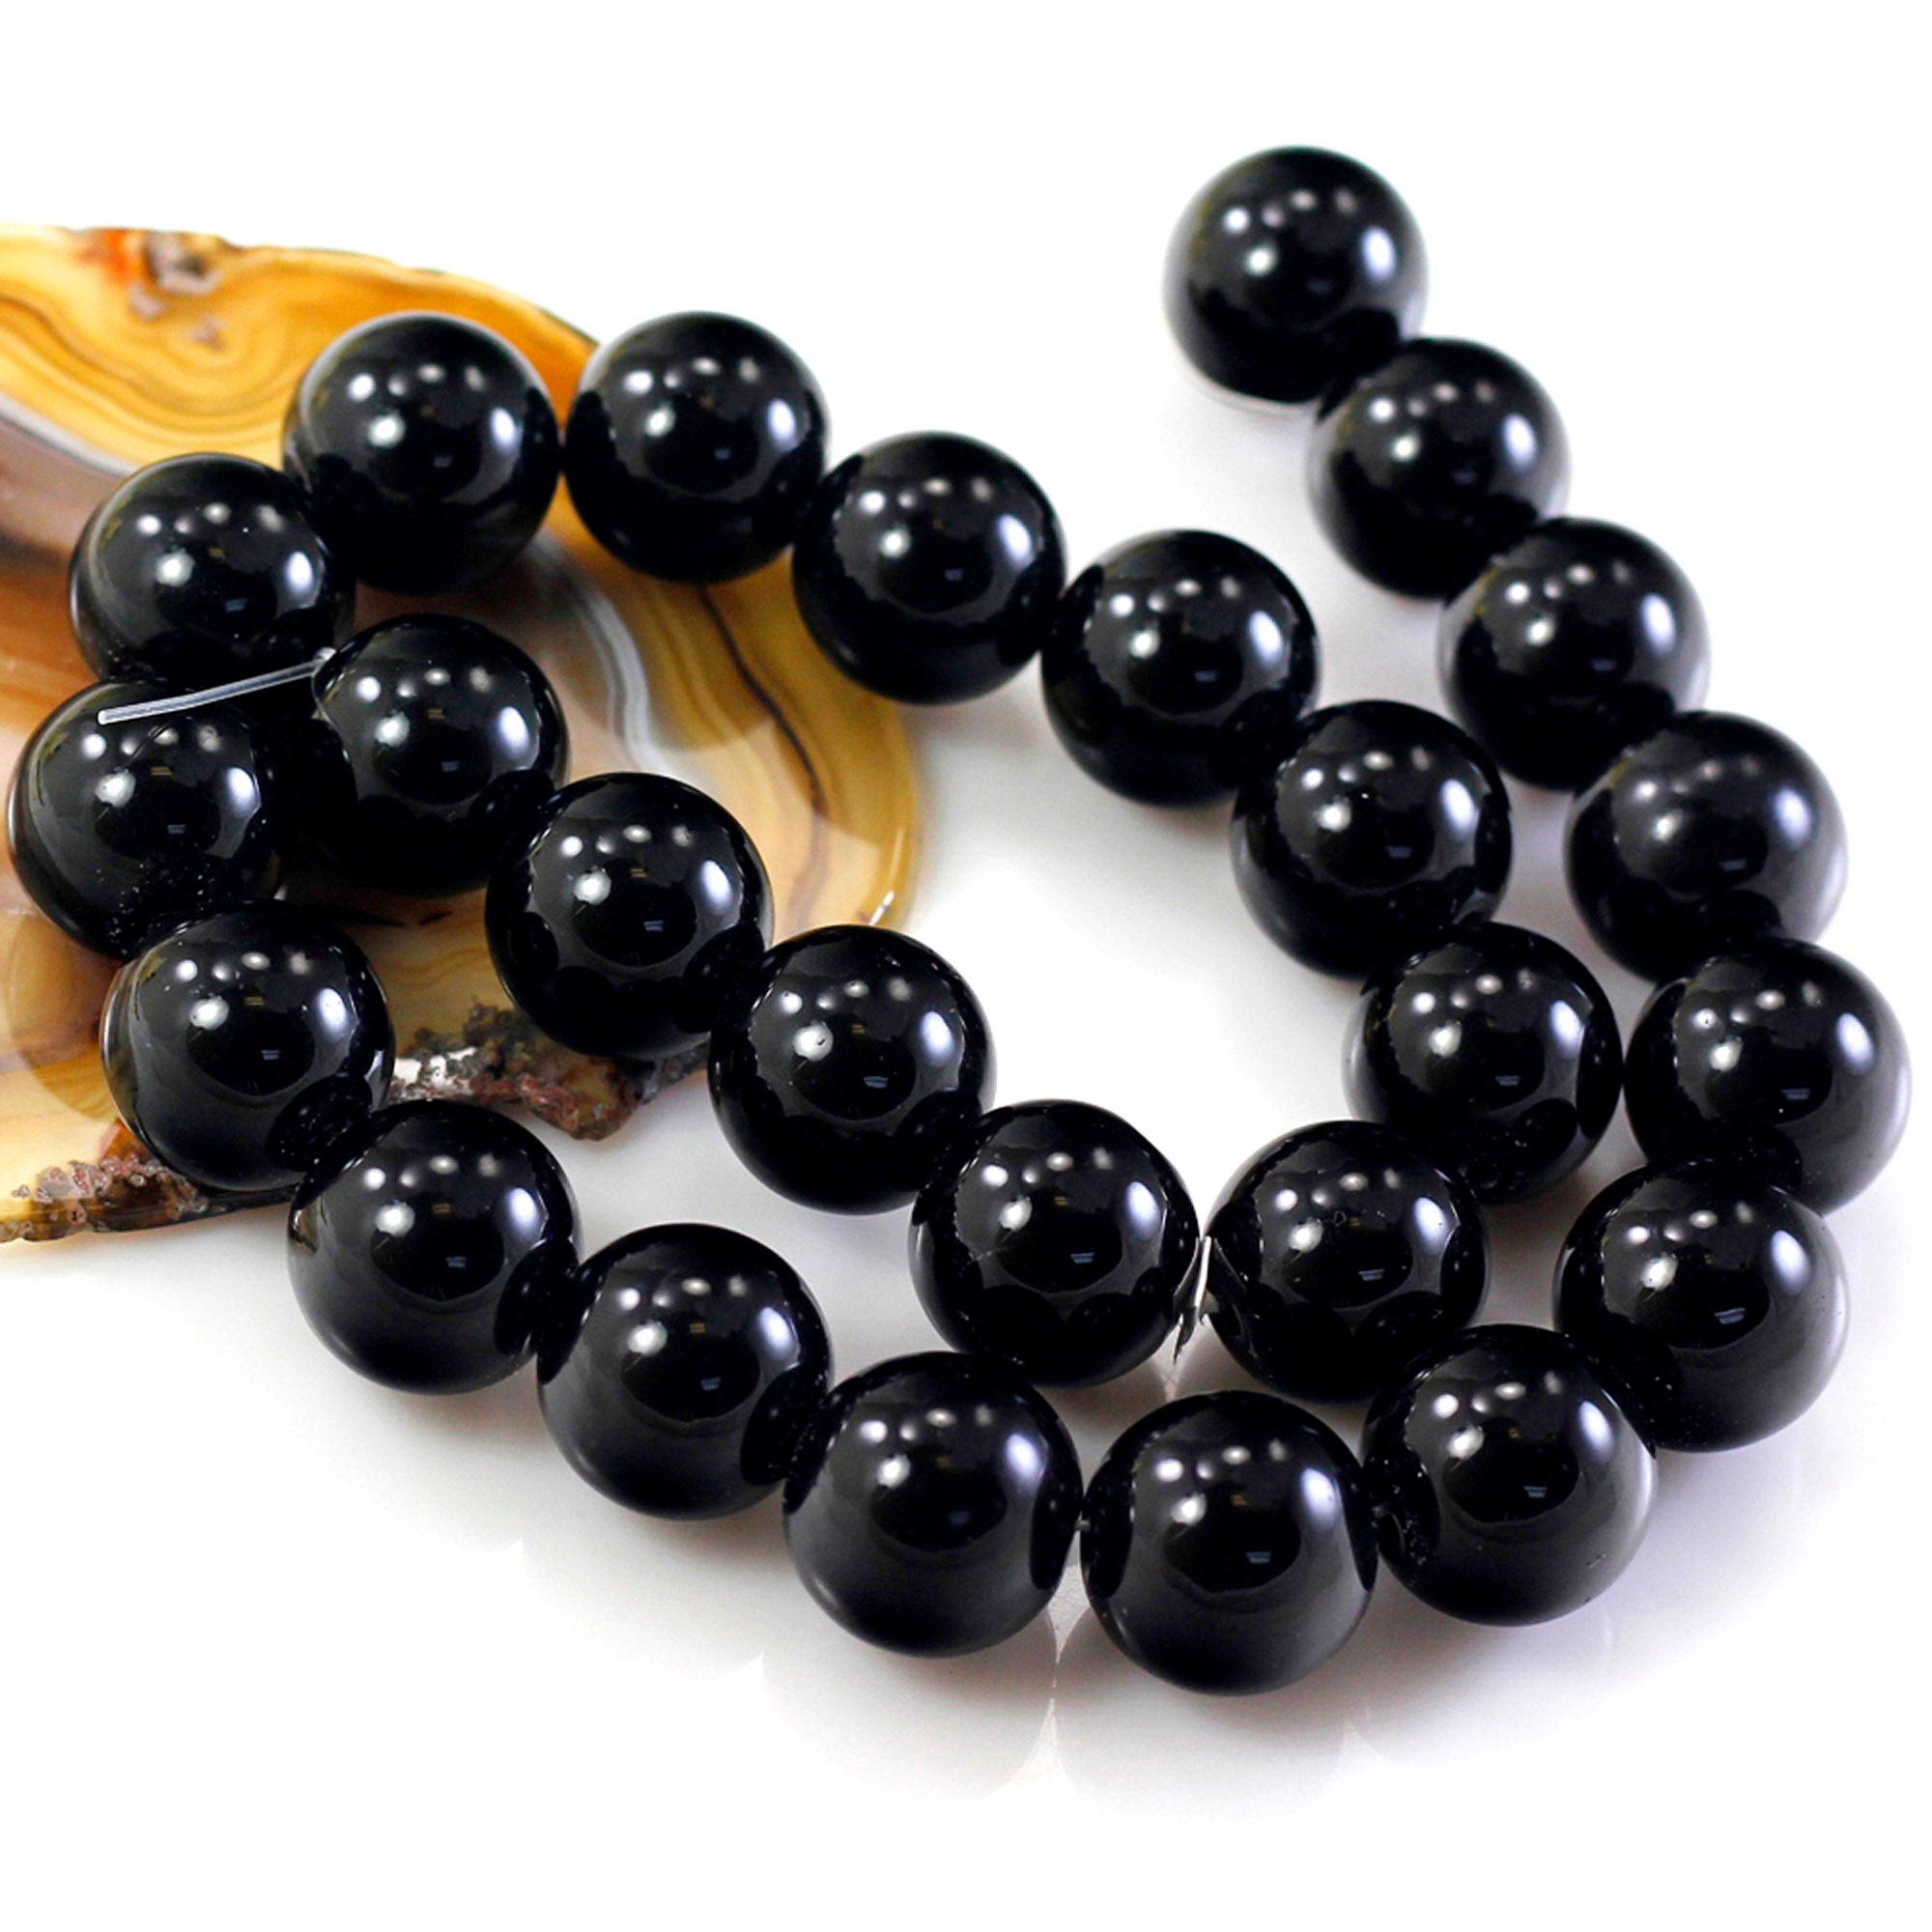 Onyx large beads (Approx 29 long, 1.25 diameter)